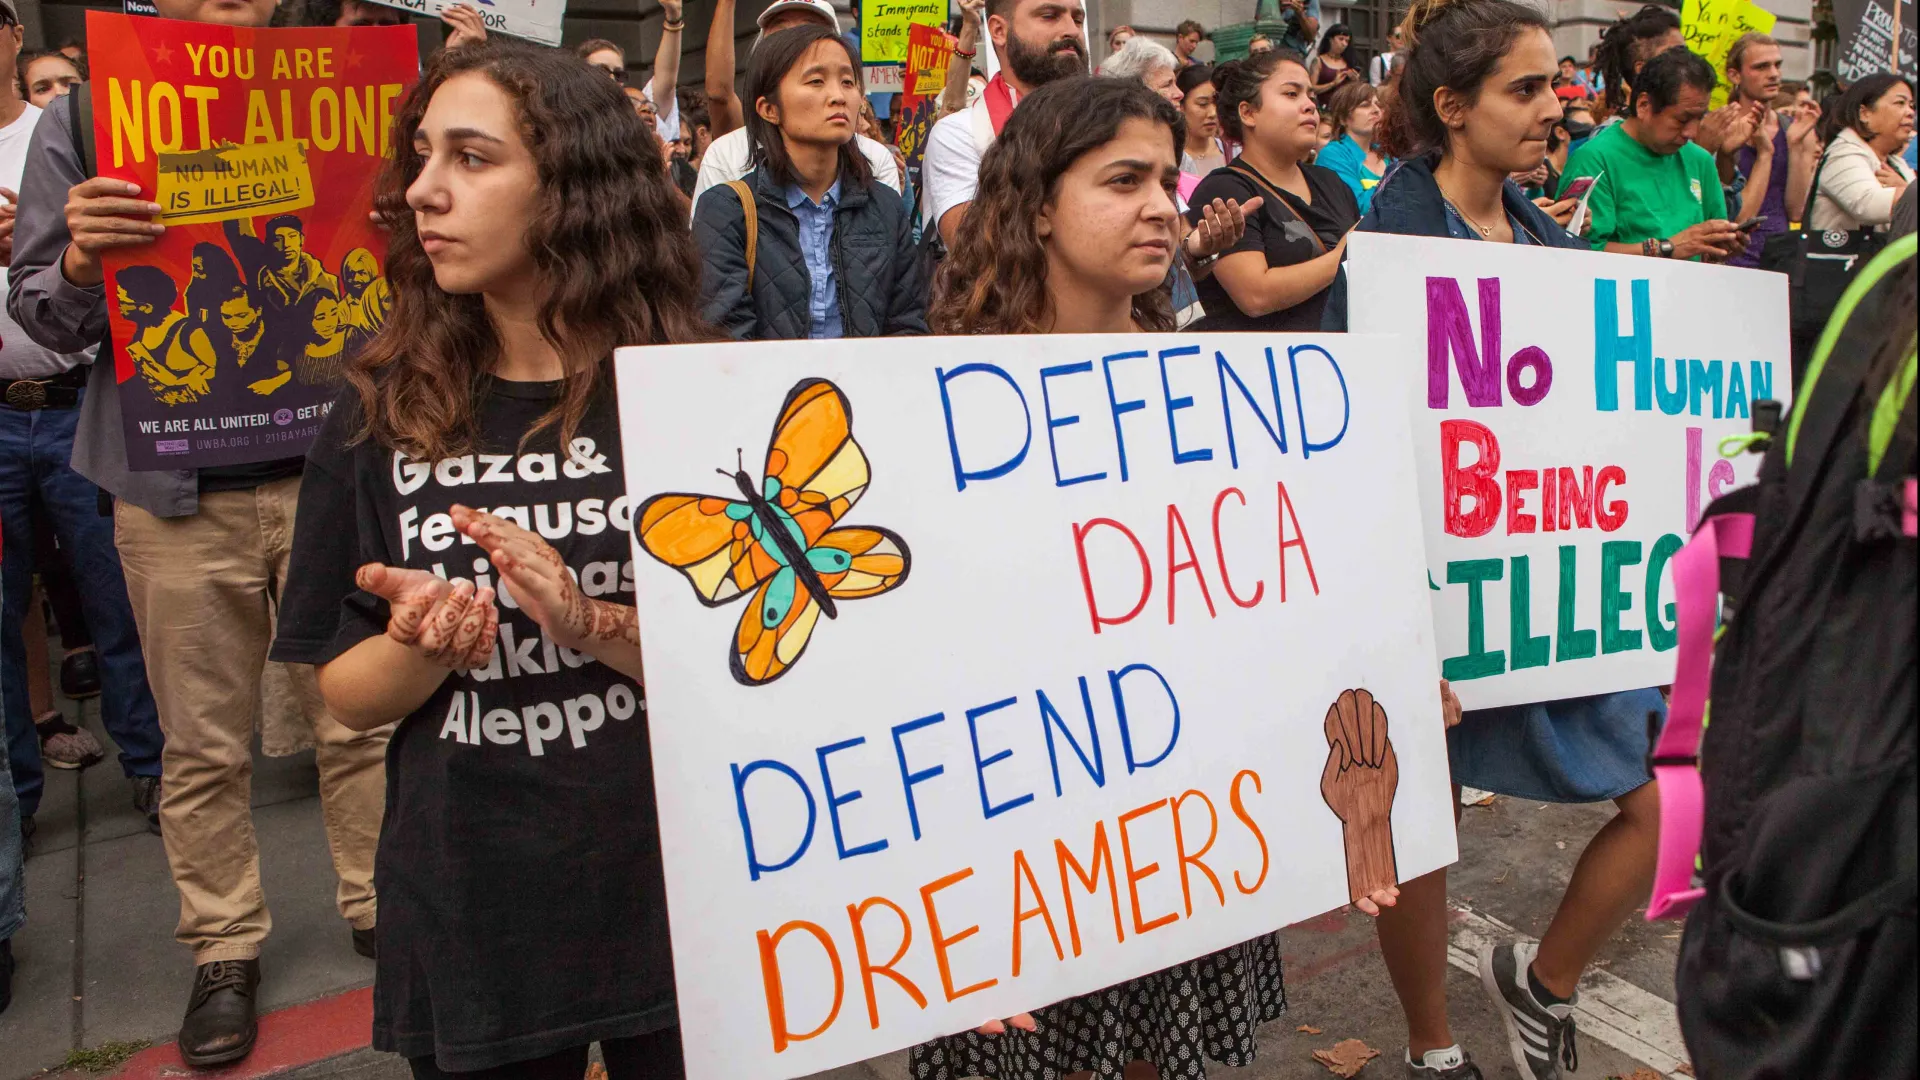 A rally in San Francisco on support of DACA. This week's conversation will focus on the June 18 U.S. Supreme Court ruling on DACA. Photo: Pax Ahimsa Gethen via Wikimedia Commons.